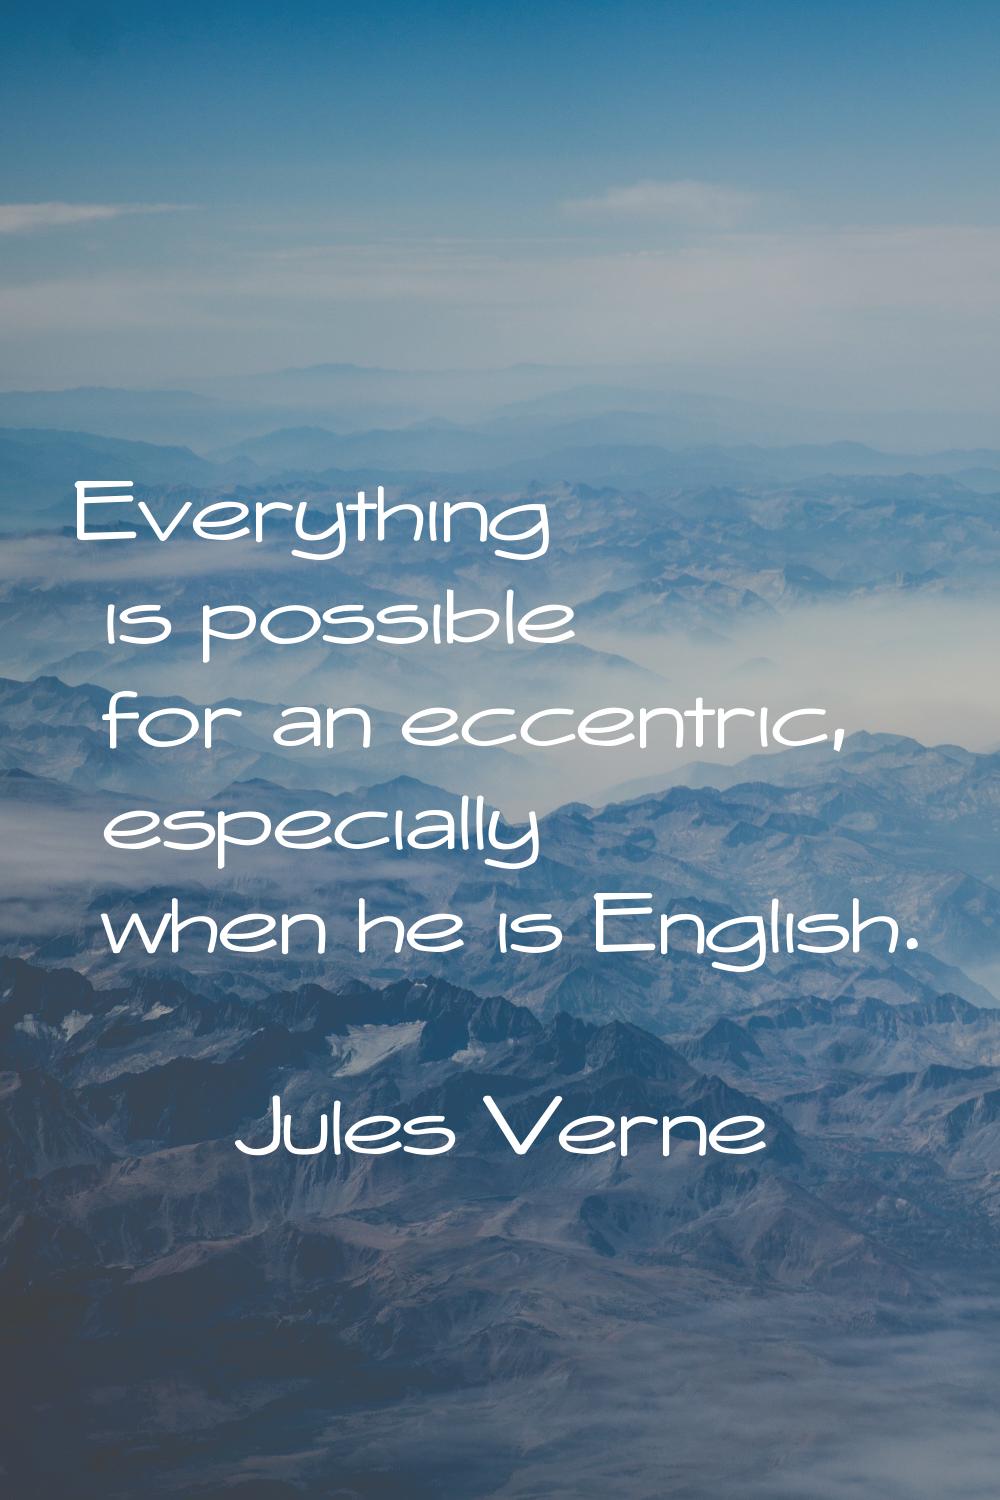 Everything is possible for an eccentric, especially when he is English.